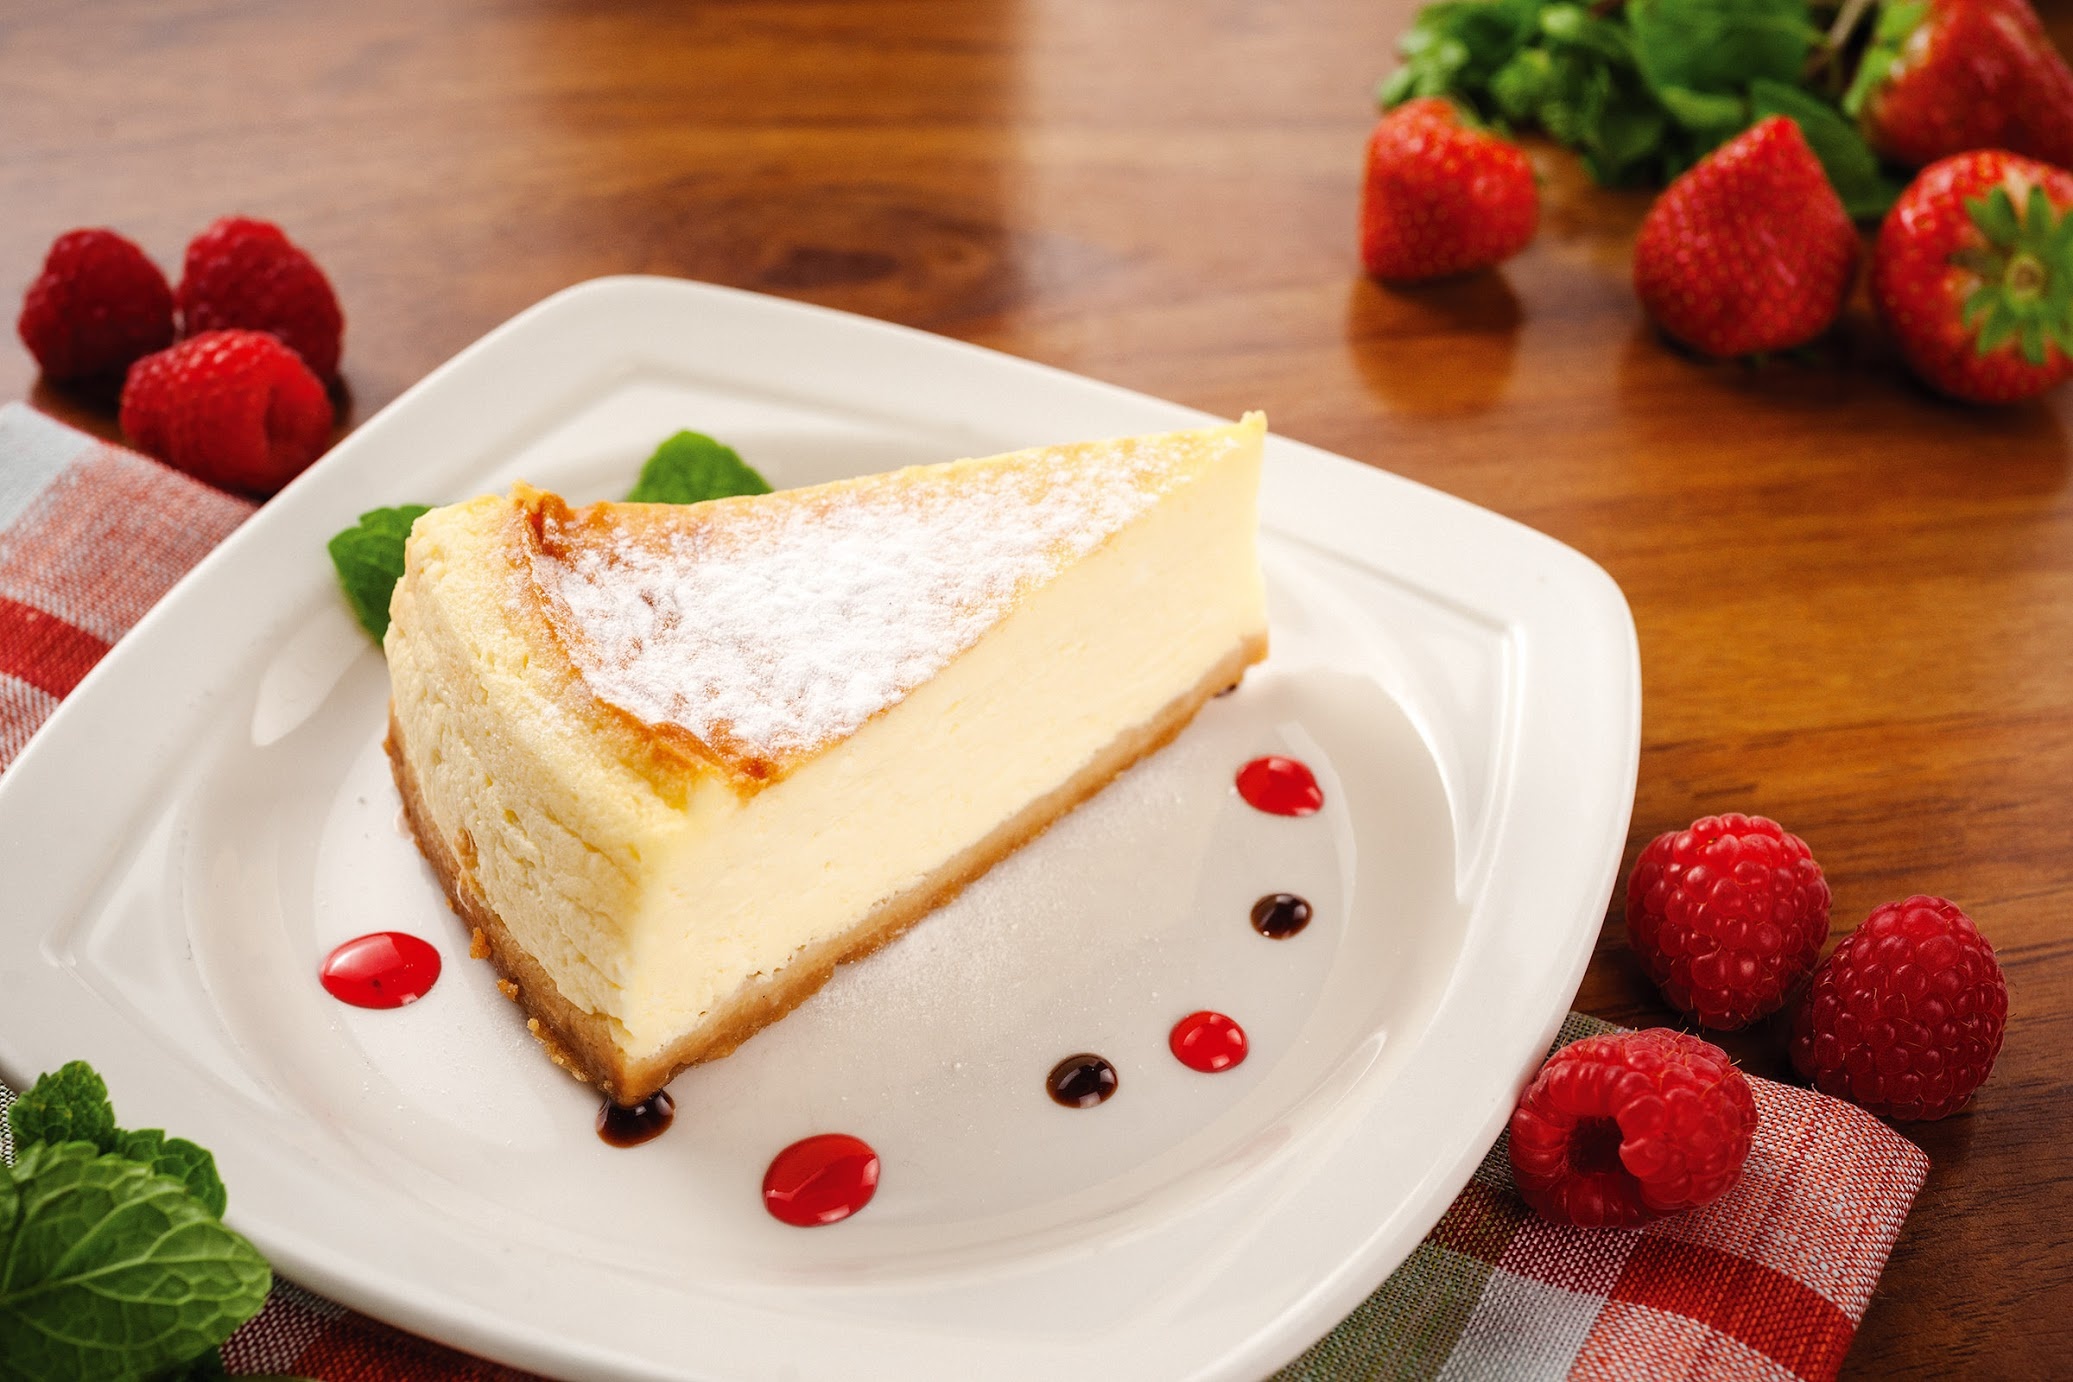 Cheesecake: Uses cream cheese in the filling and a crispy crust made from graham cracker or cookie crumbs. 2080x1390 HD Wallpaper.